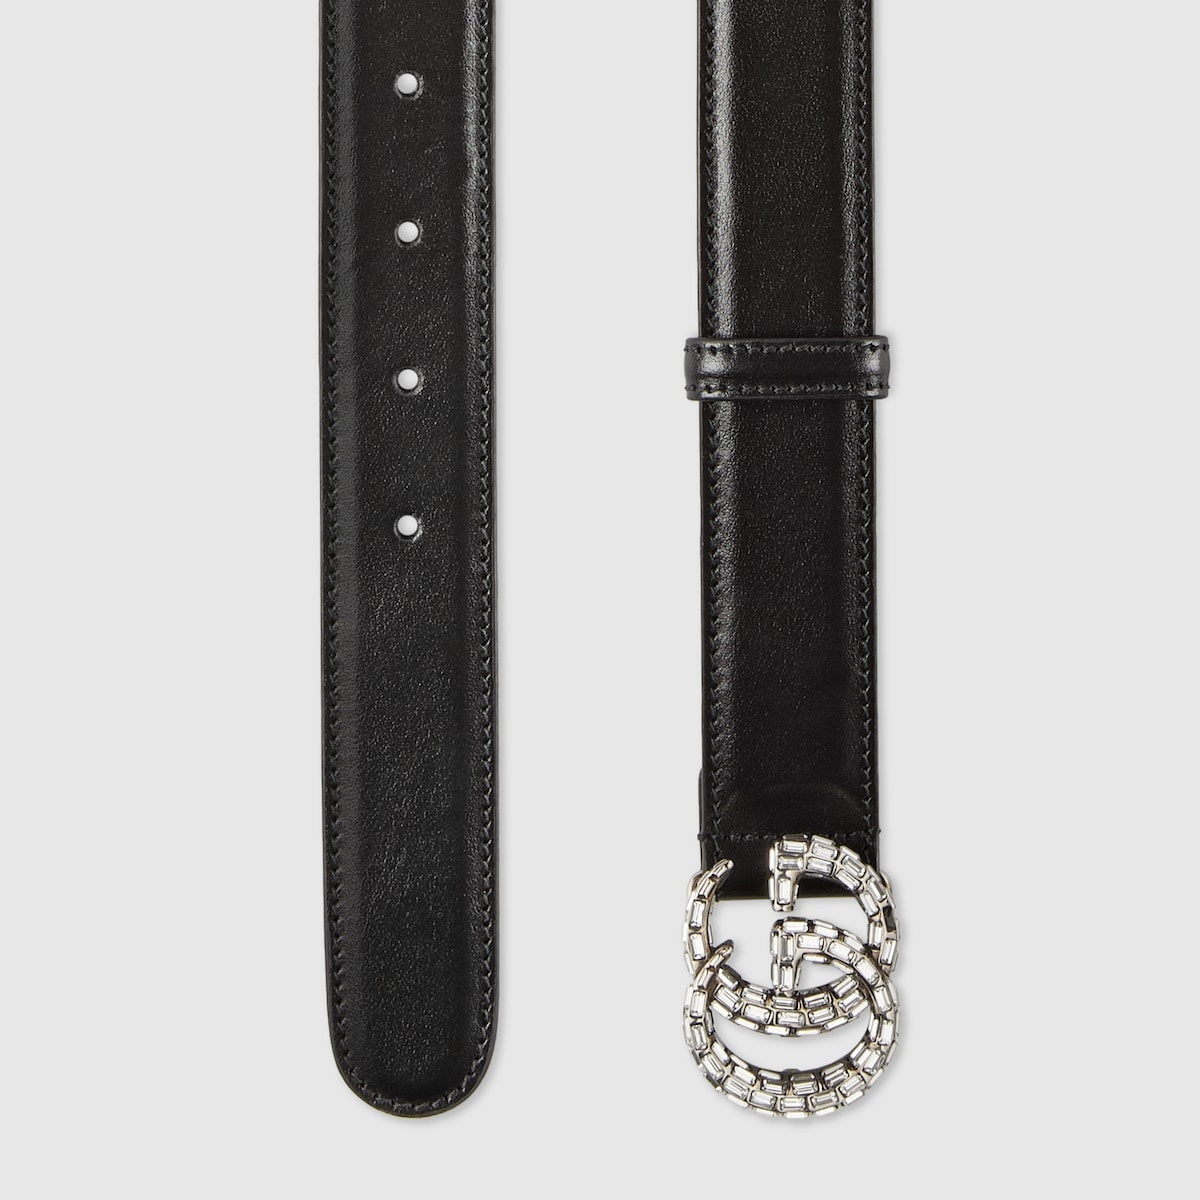 GG Marmont thin belt with crystals - 2